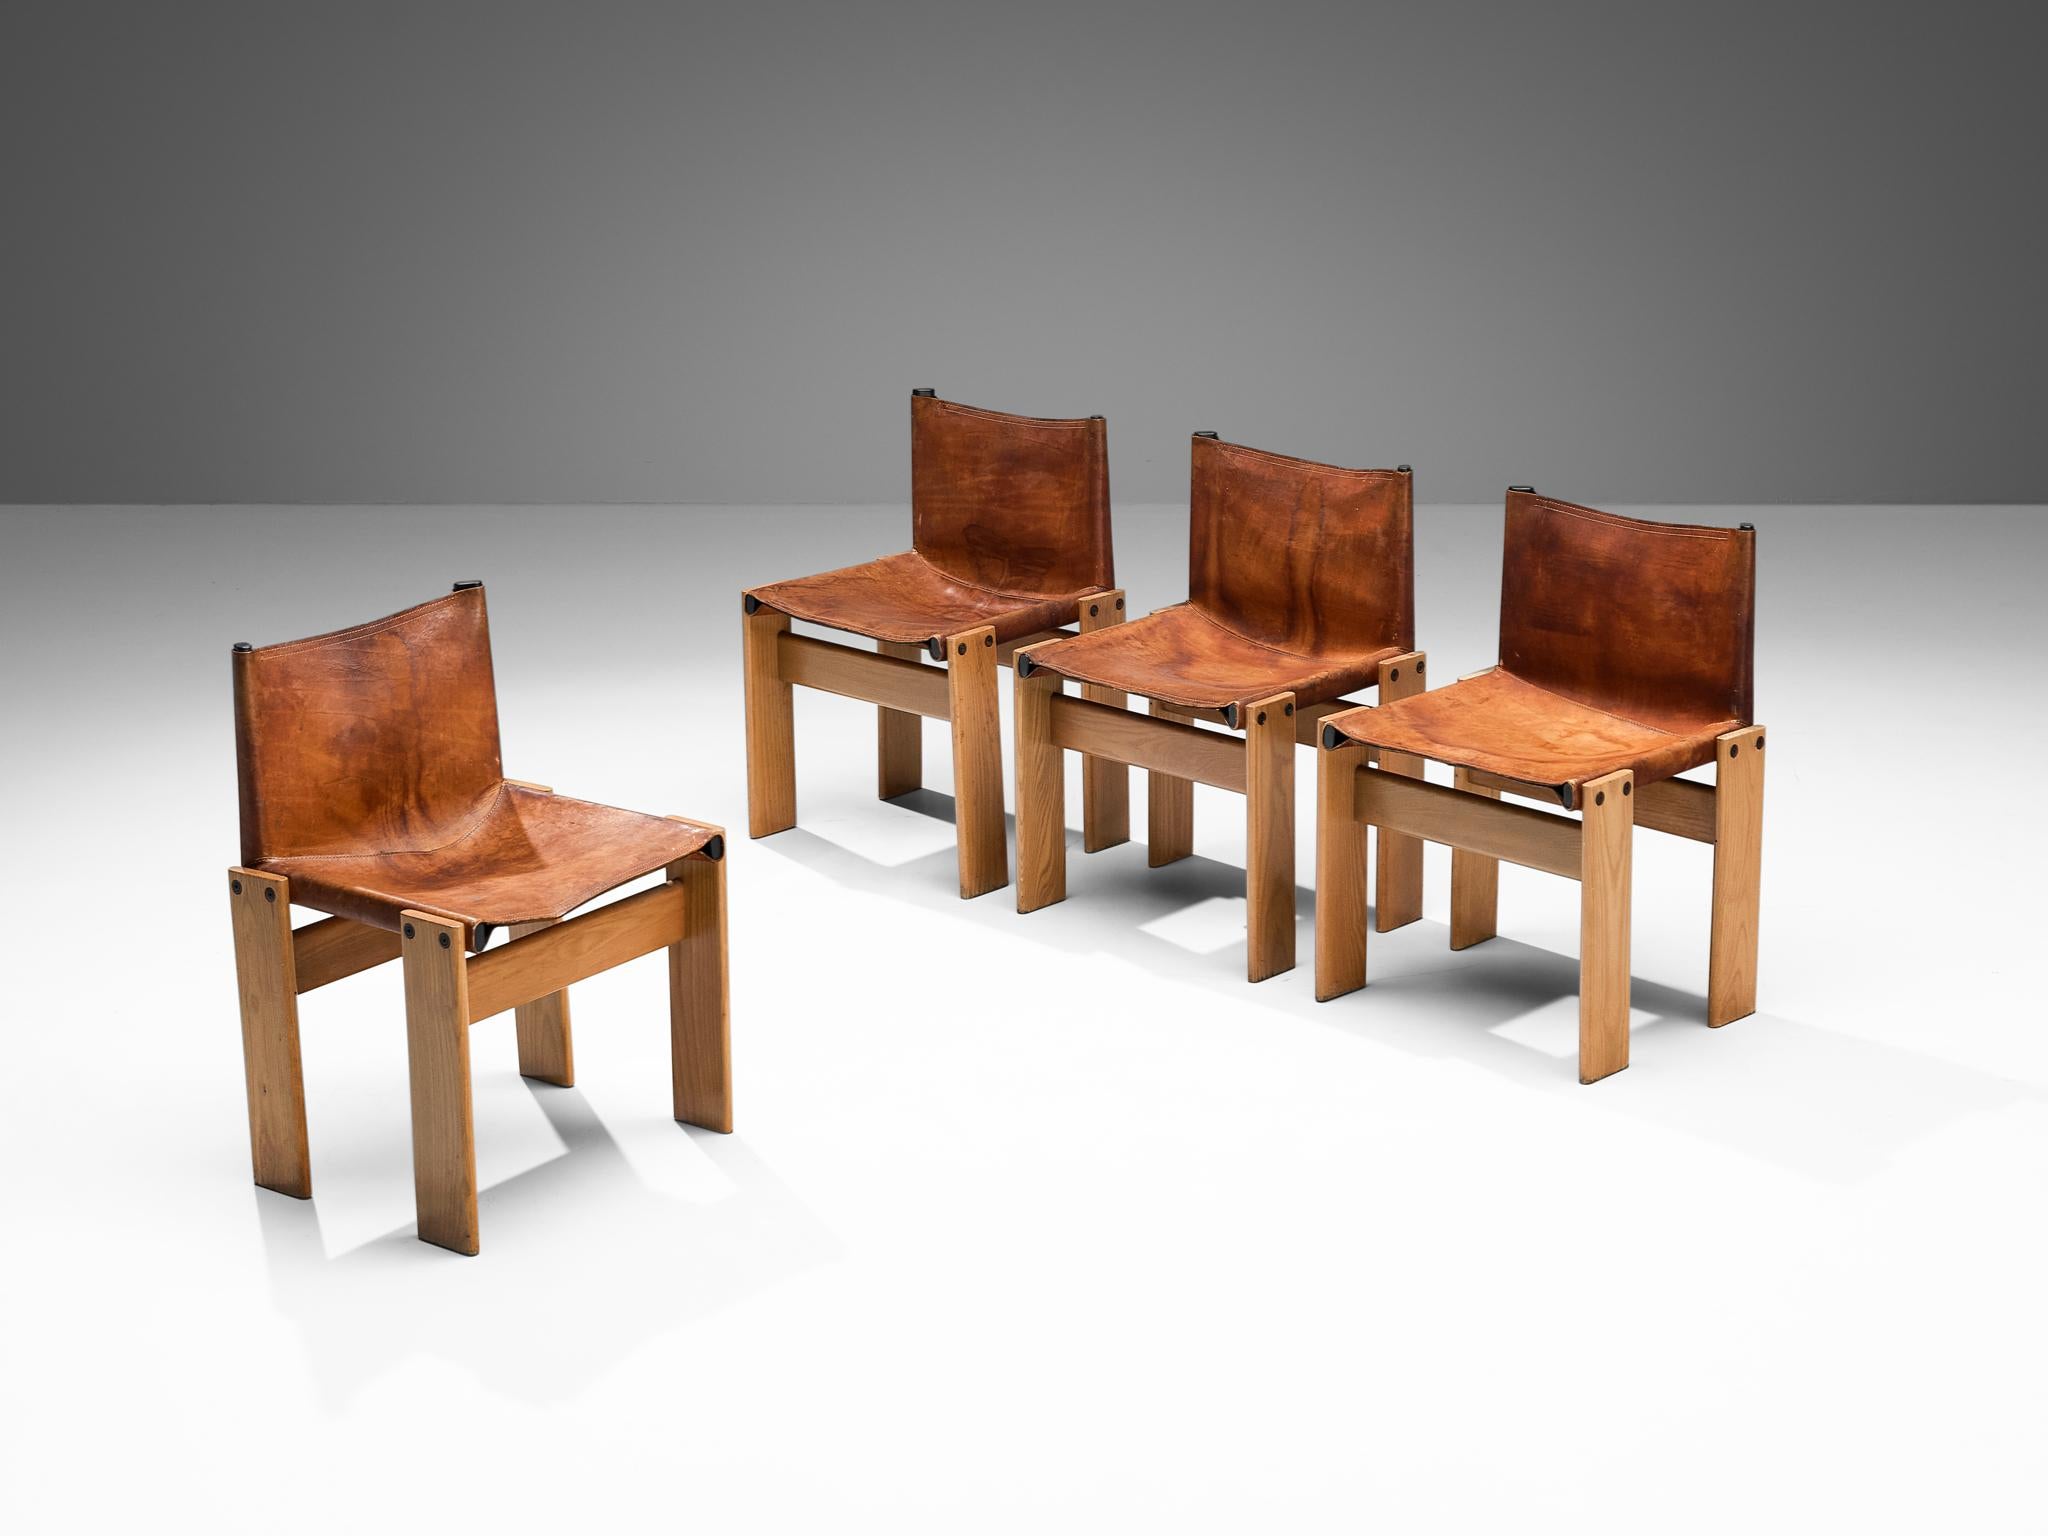 Afra & Tobia Scarpa for Molteni, set of four 'Monk' dining chairs, ash, cognac leather, Italy, 1974.

Set of four 'Monk' chairs by Italian designers Afra & Tobia Scarpa. The deep cognac leather shows beautiful patina and forms a striking combination